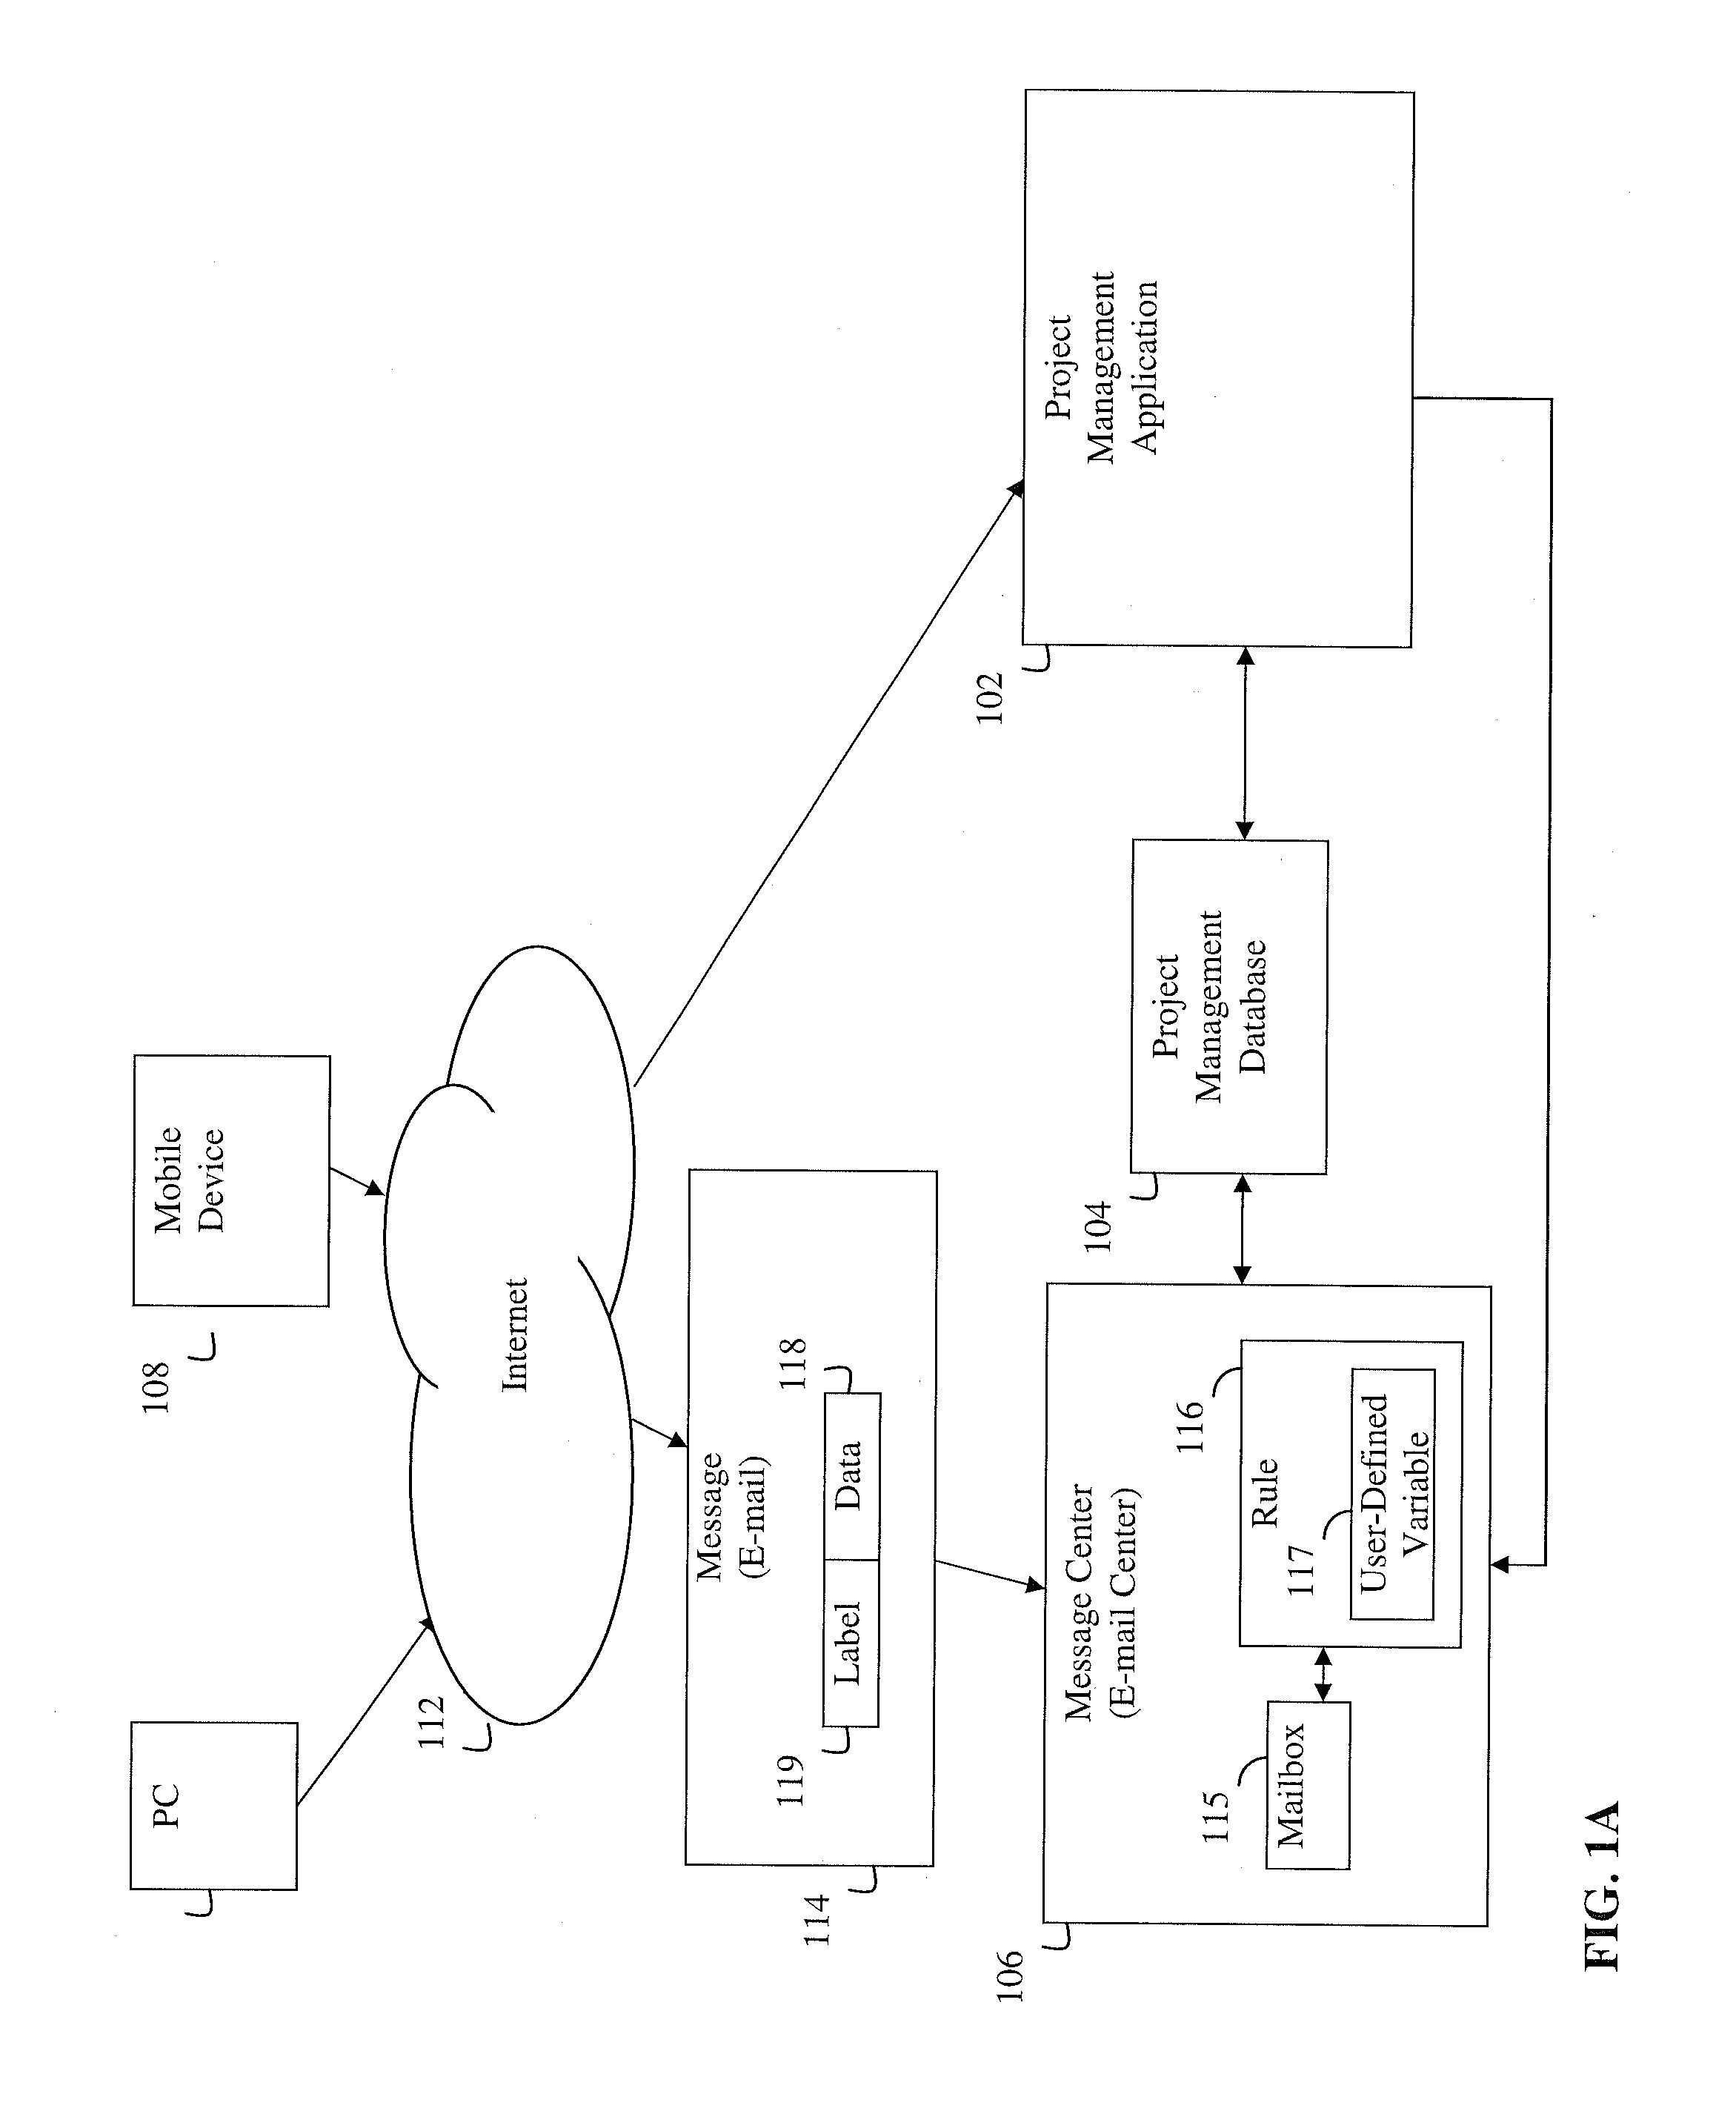 System and method for project management system operation using electronic messaging